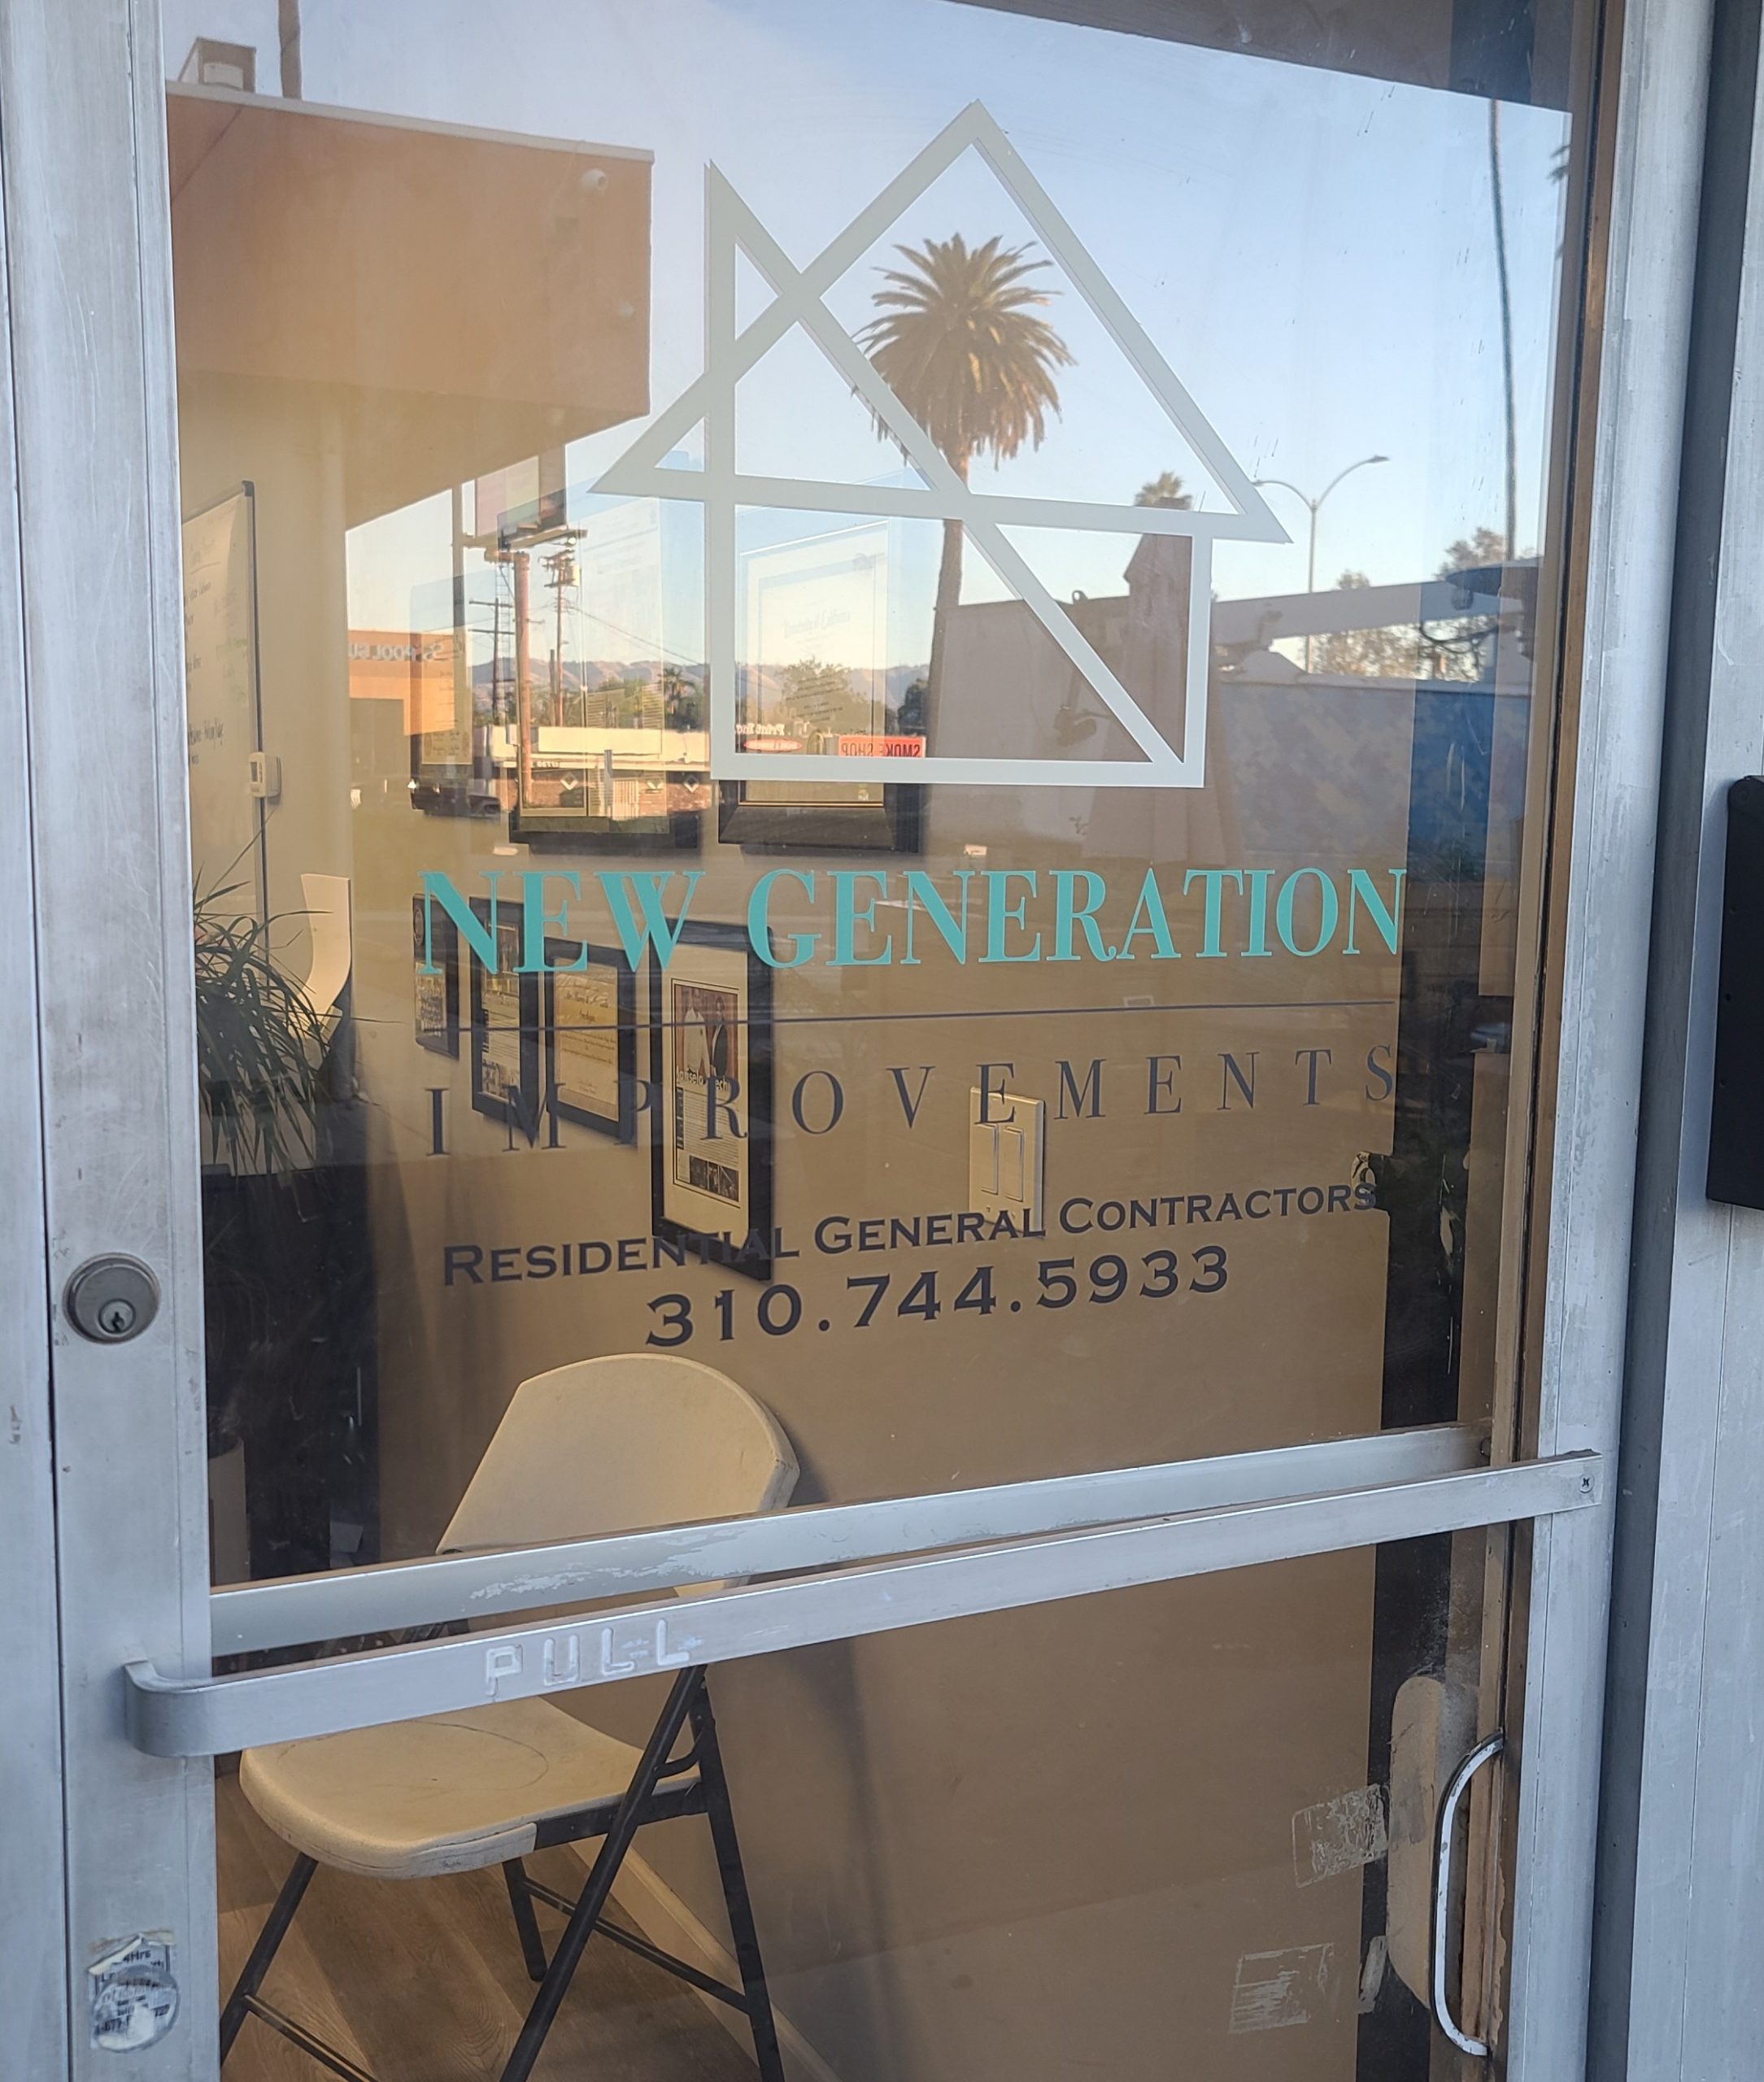 You are currently viewing Glass Door Graphics for New Generation Improvements in Reseda